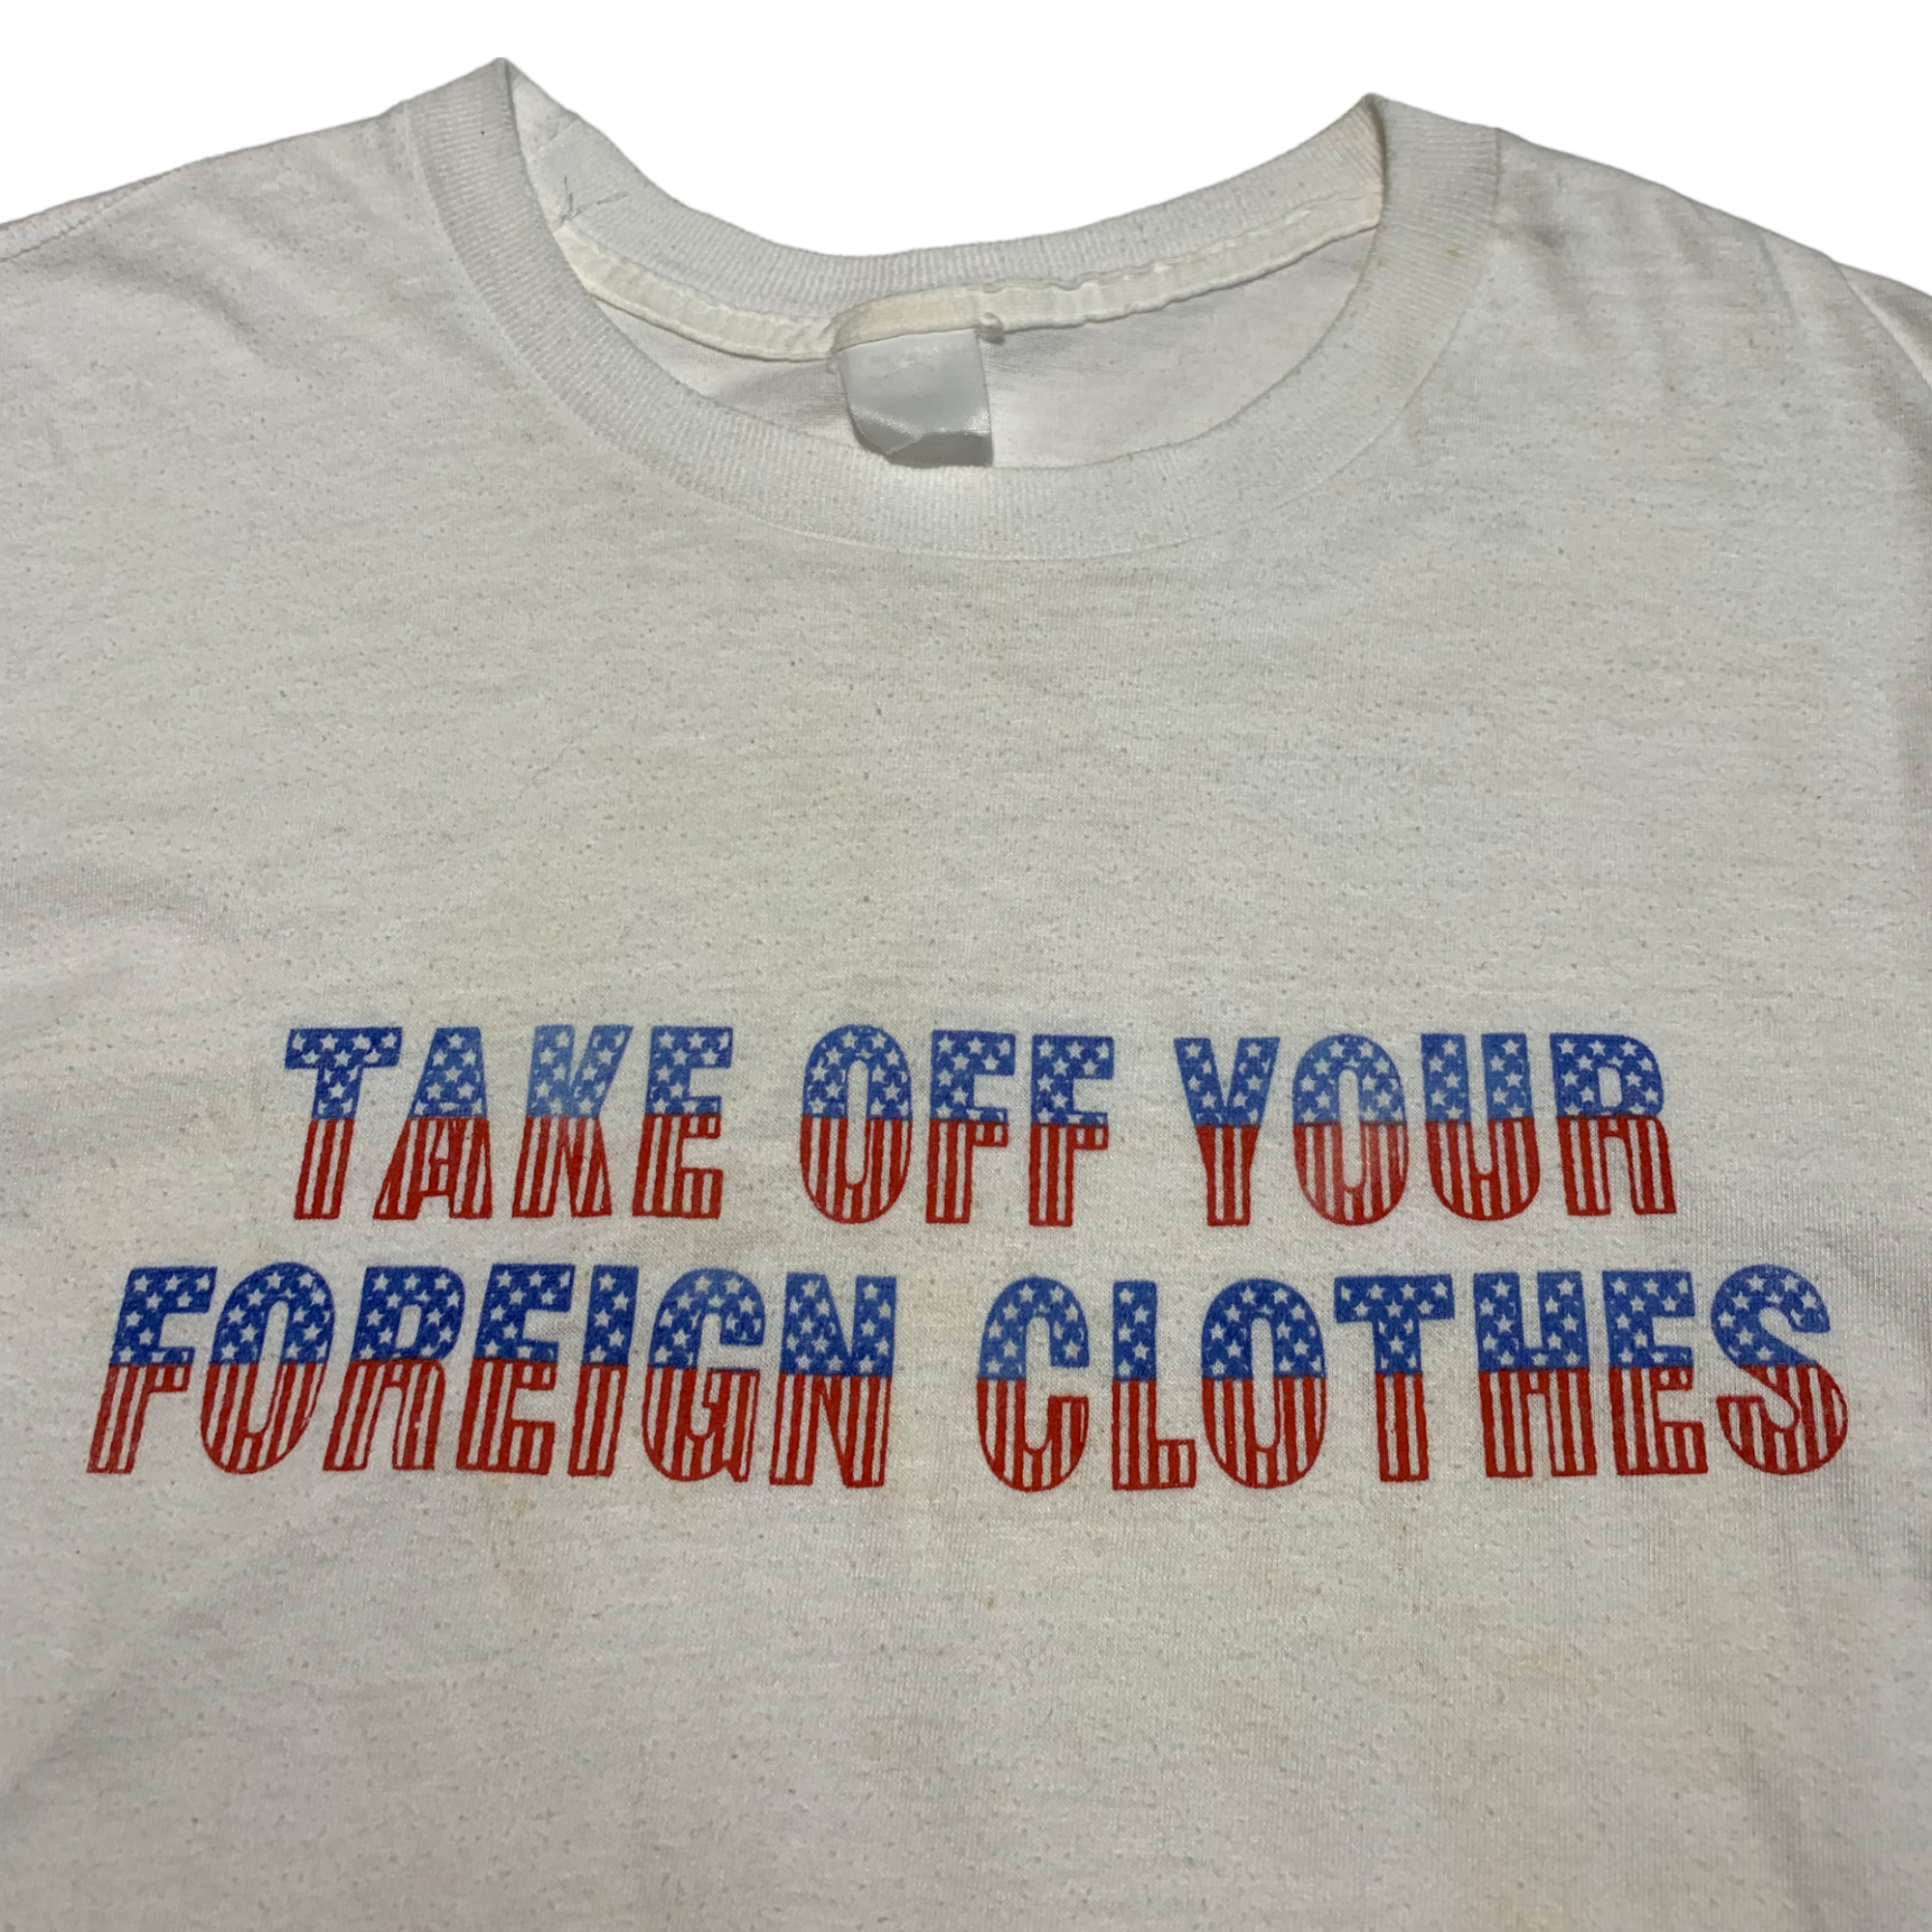 ‘Take Off Your Foreign Clothes’ 80s Textile Industry T-Shirt - Aged White - XS/S